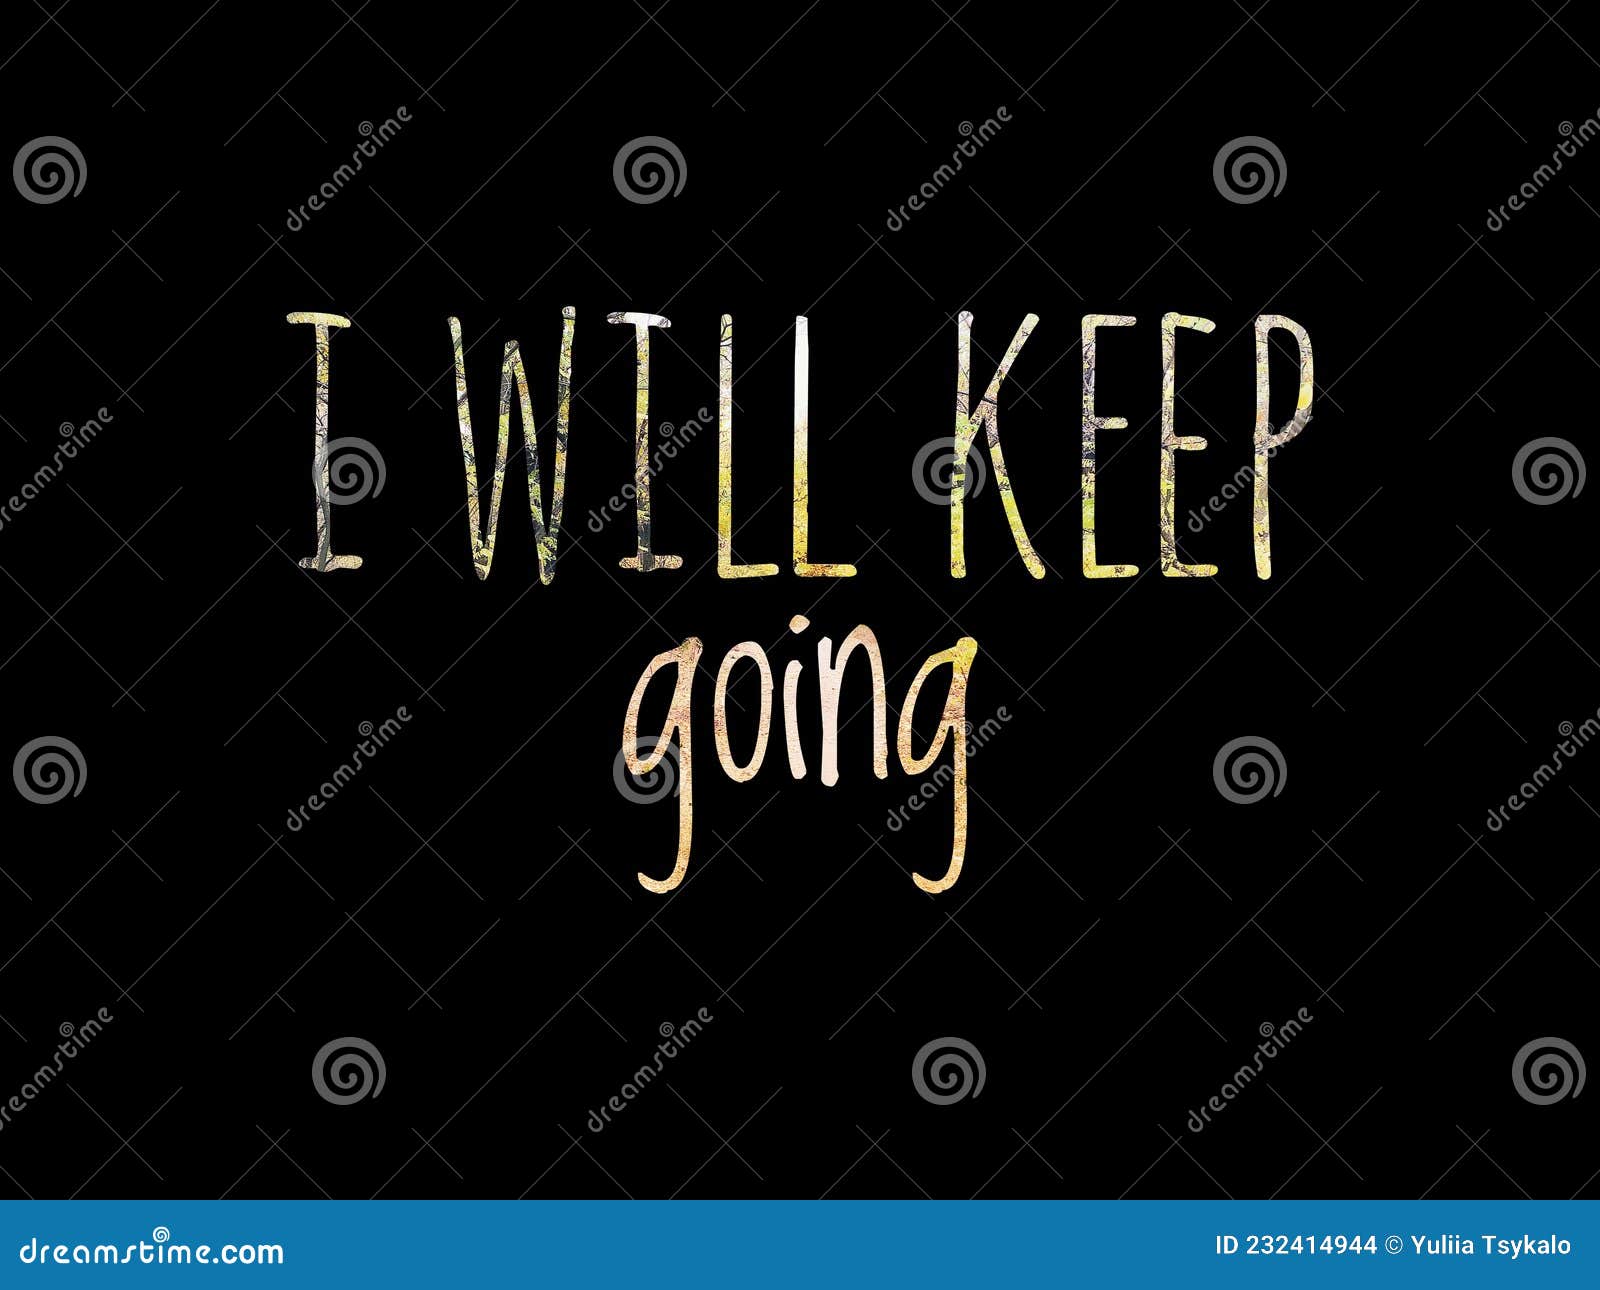 i will keep going quote text